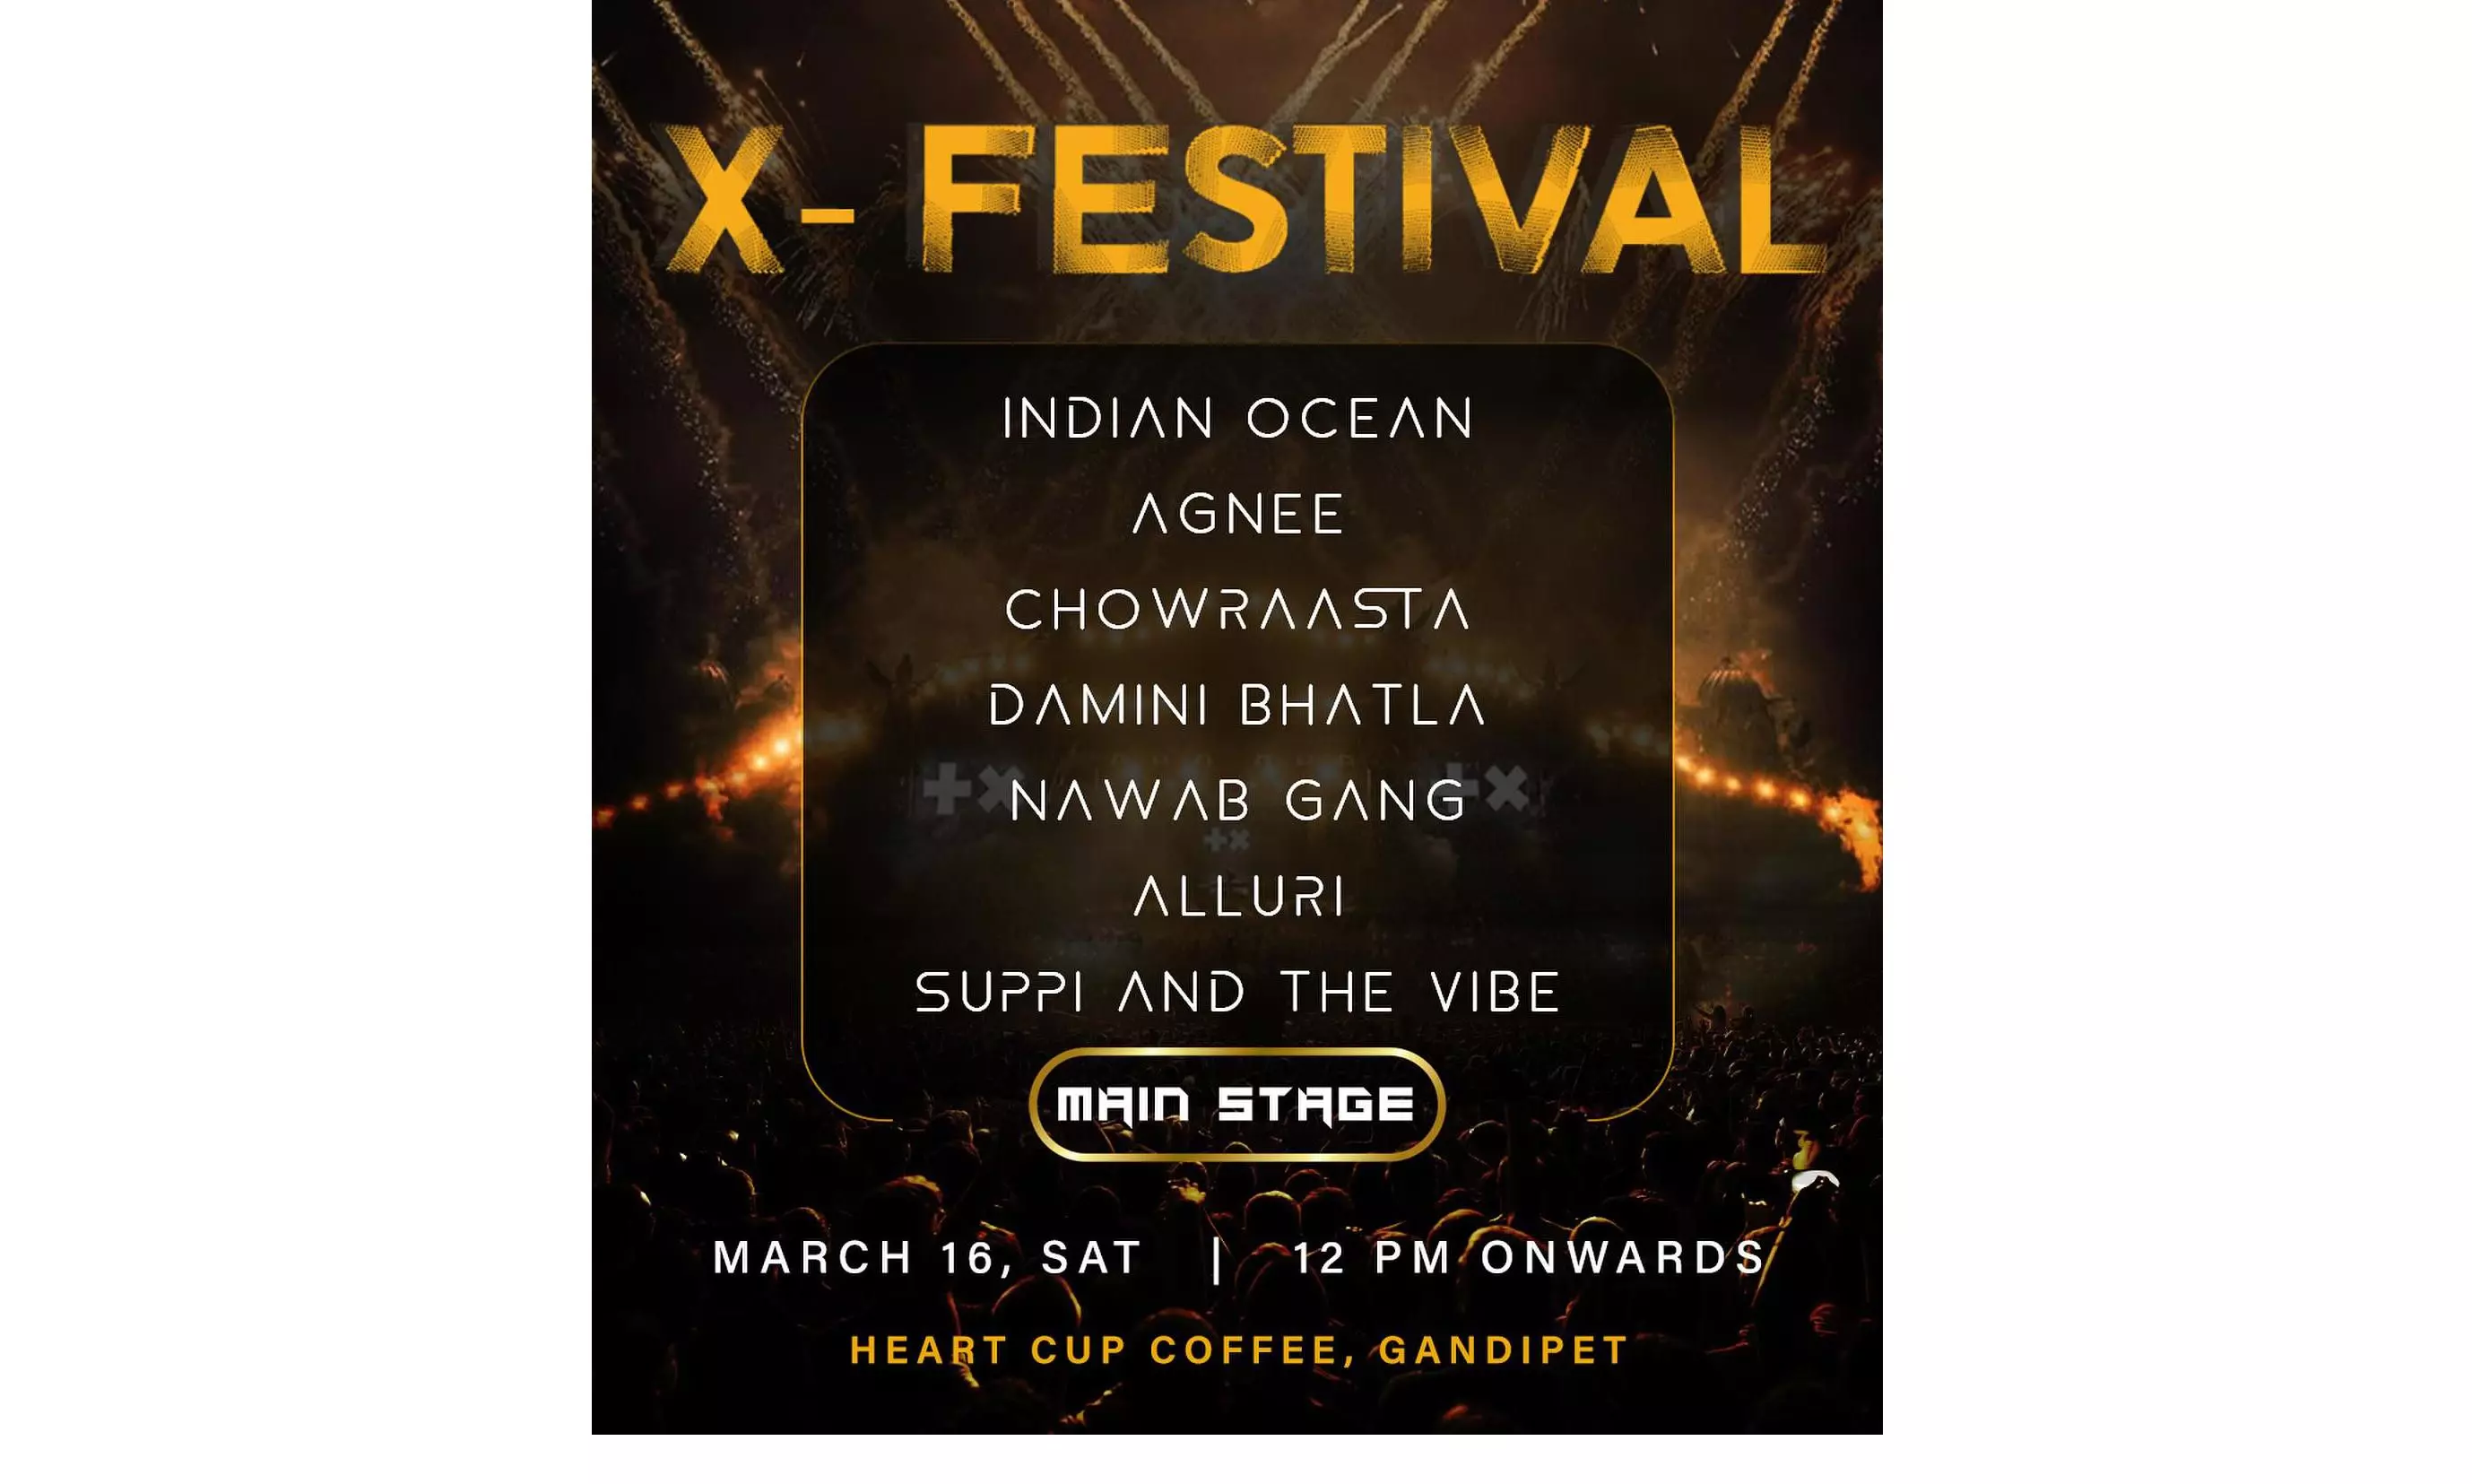 X-Festival To Debut in Hyderabad City on March 16